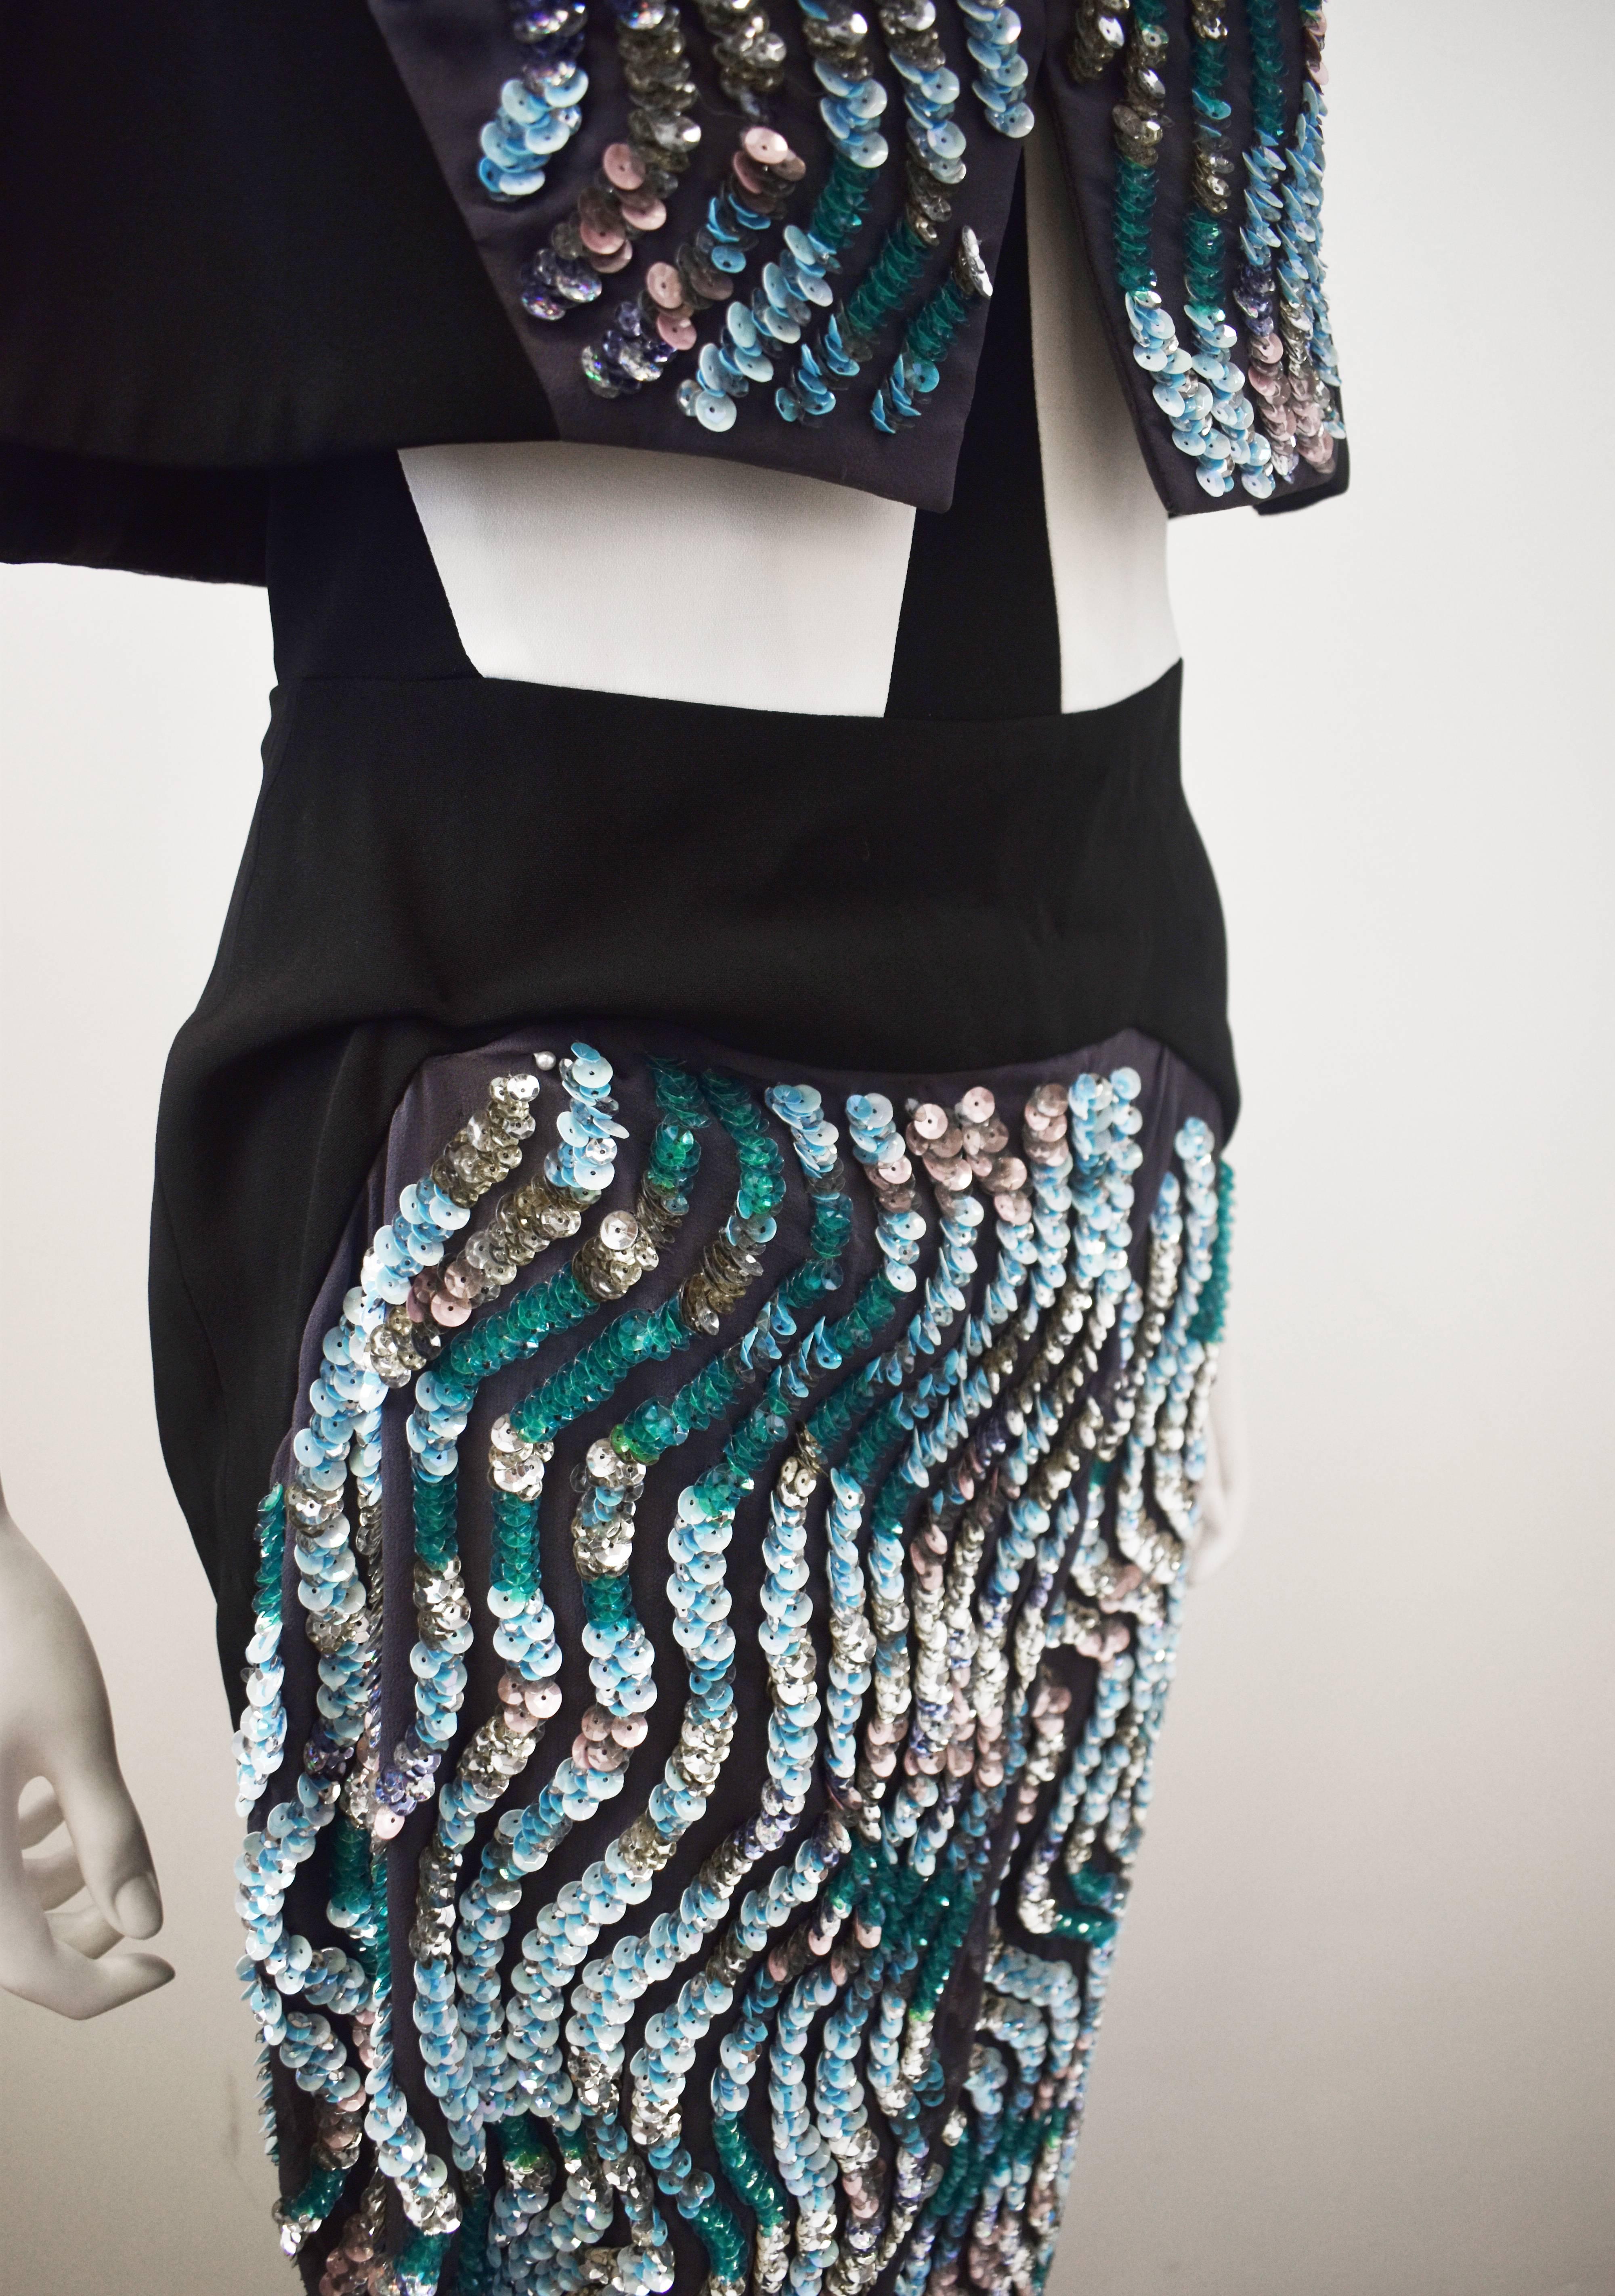 Peter Pilotto Strapless Embellished Sequin Cocktail ‘Wave’ Dress A/W 13 2